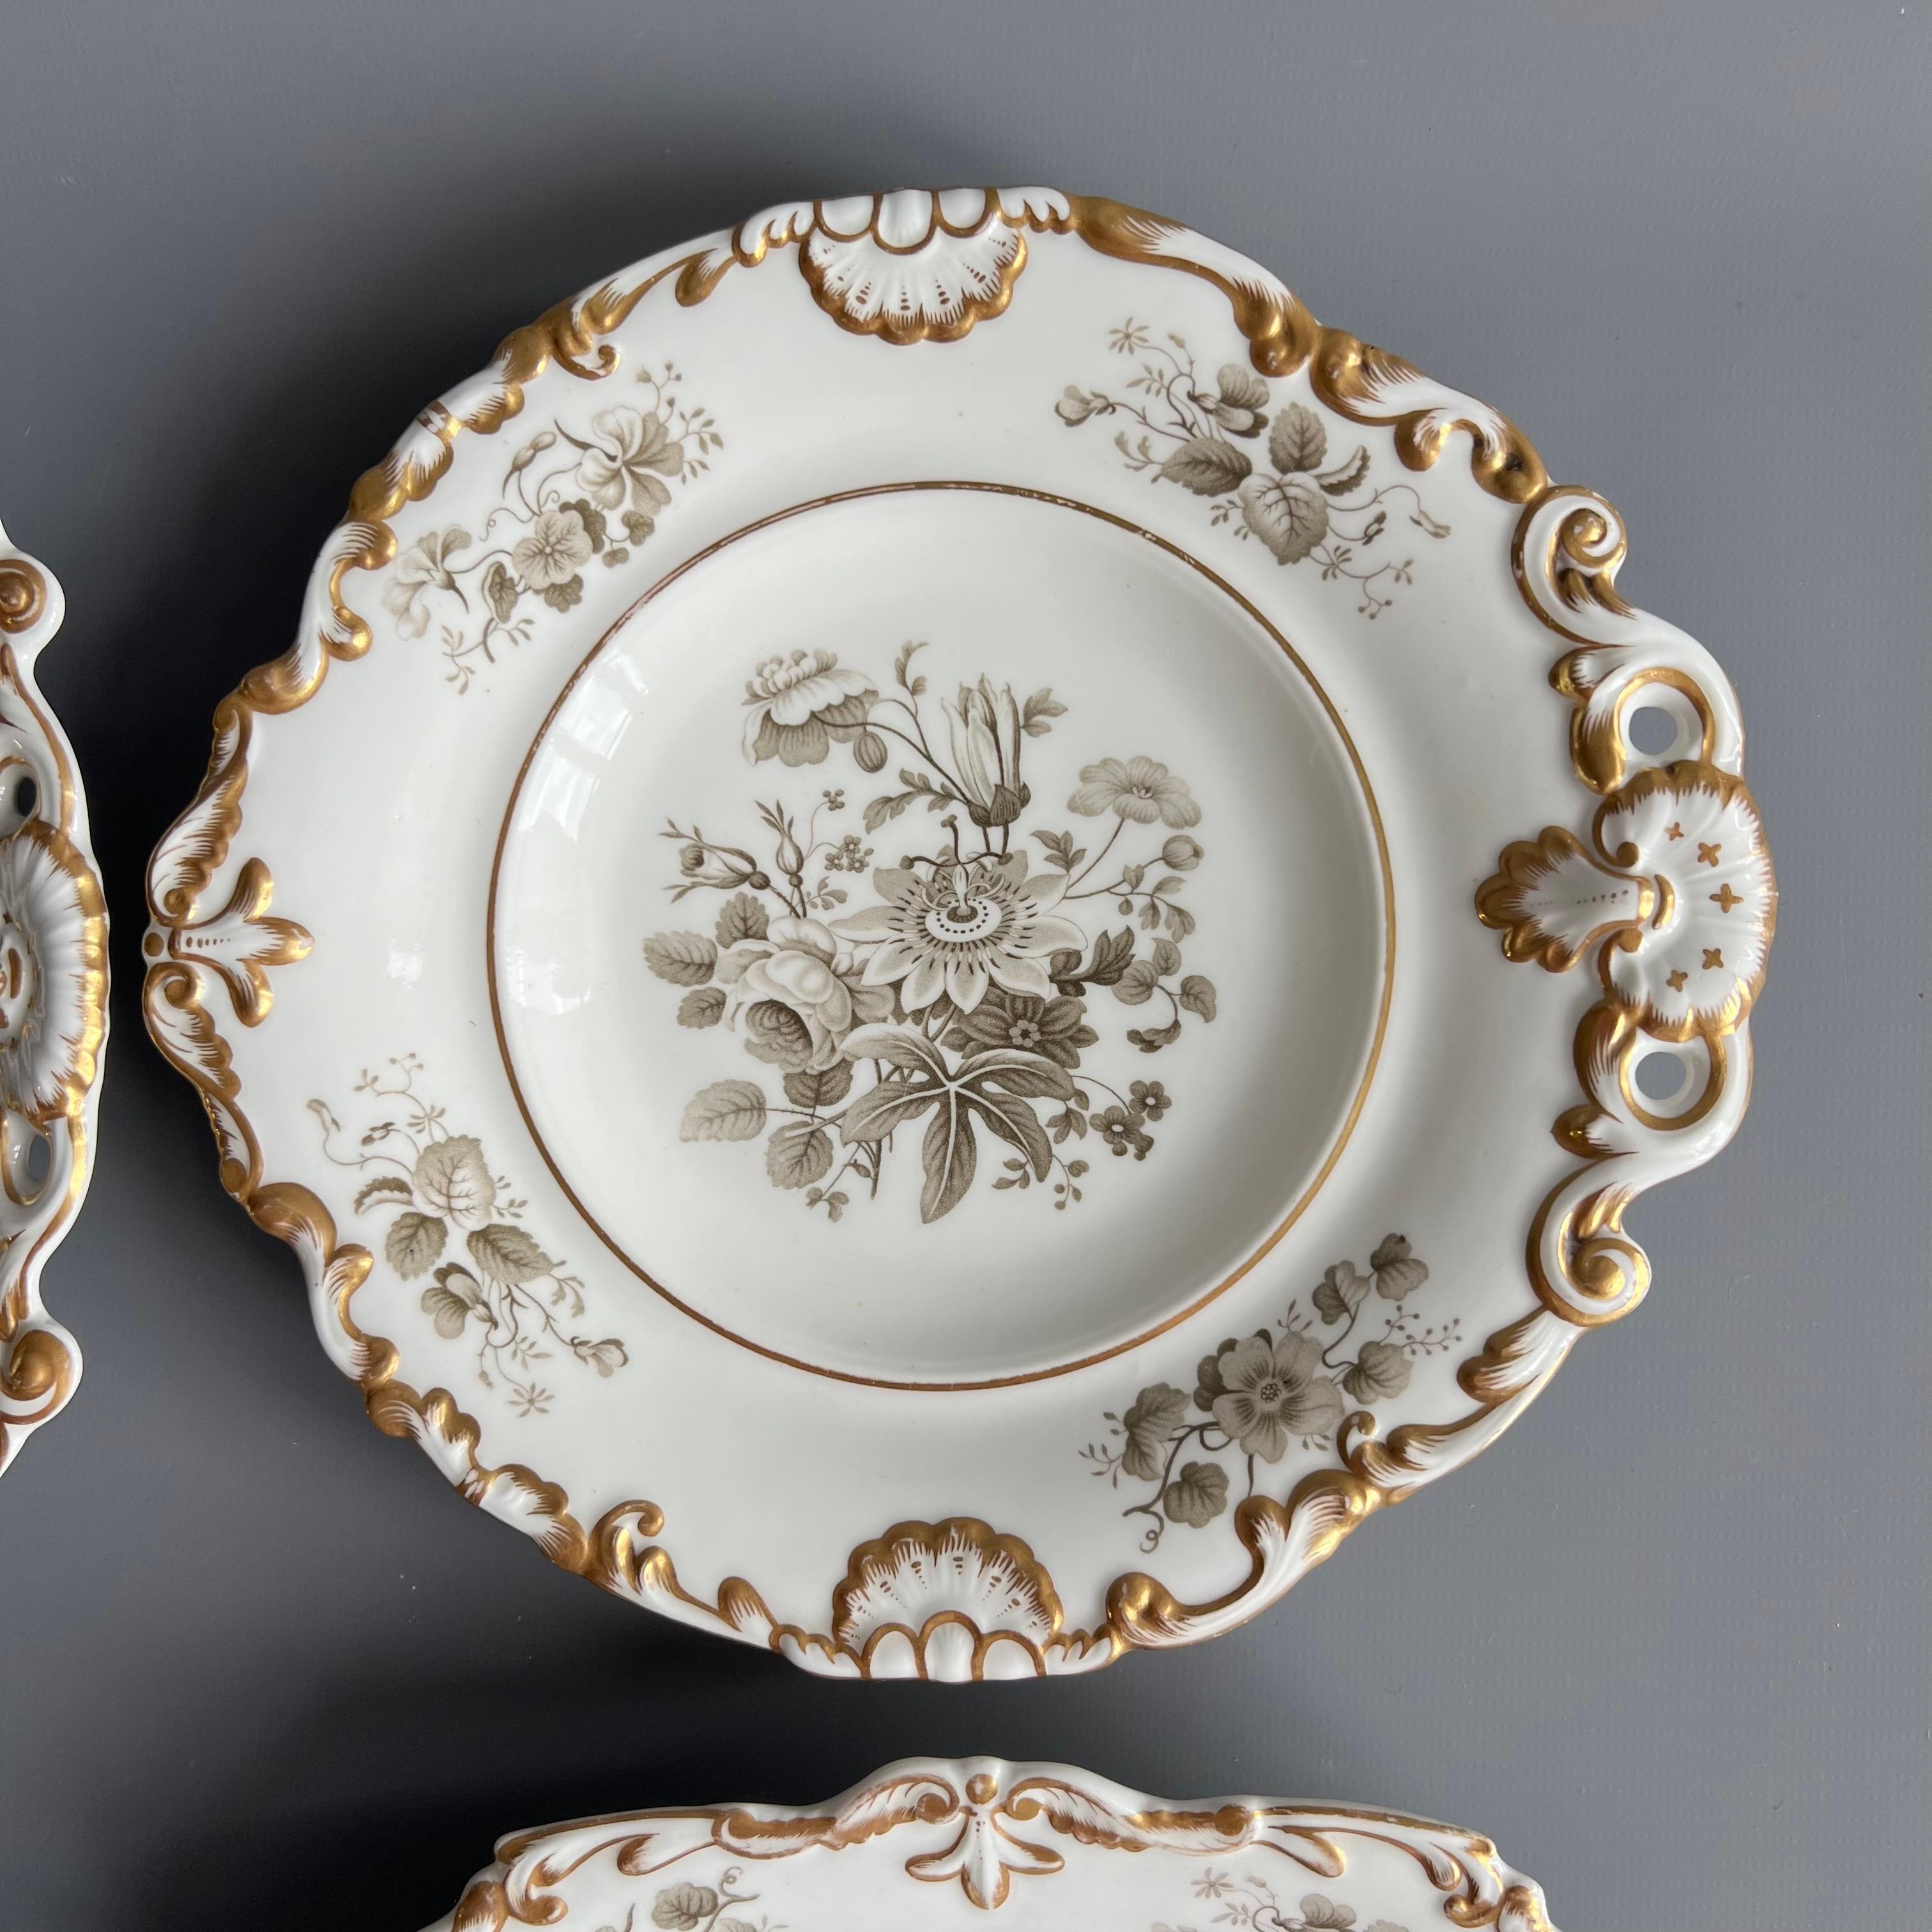 Minton Dessert Service, Inverted Shell White with Monochrome Flowers, ca 1830 For Sale 7